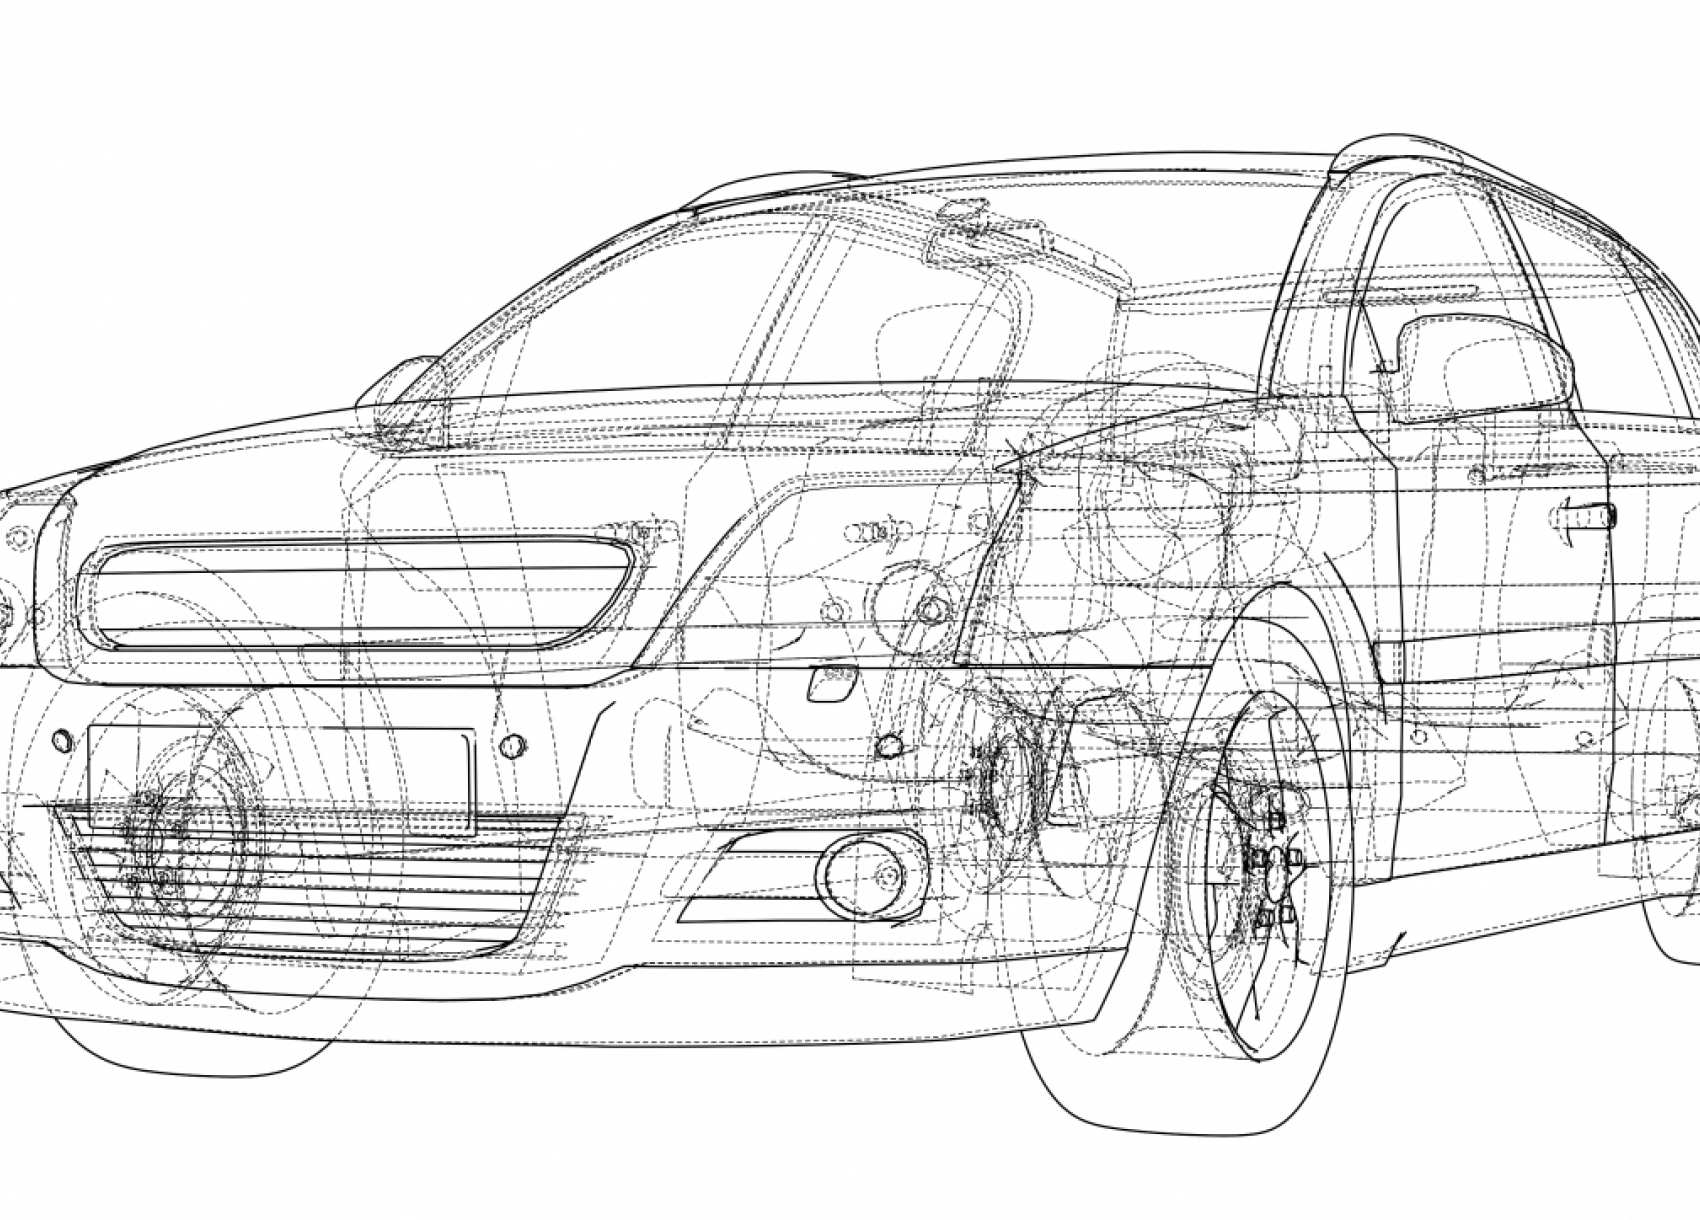 The technical drawing of a car.